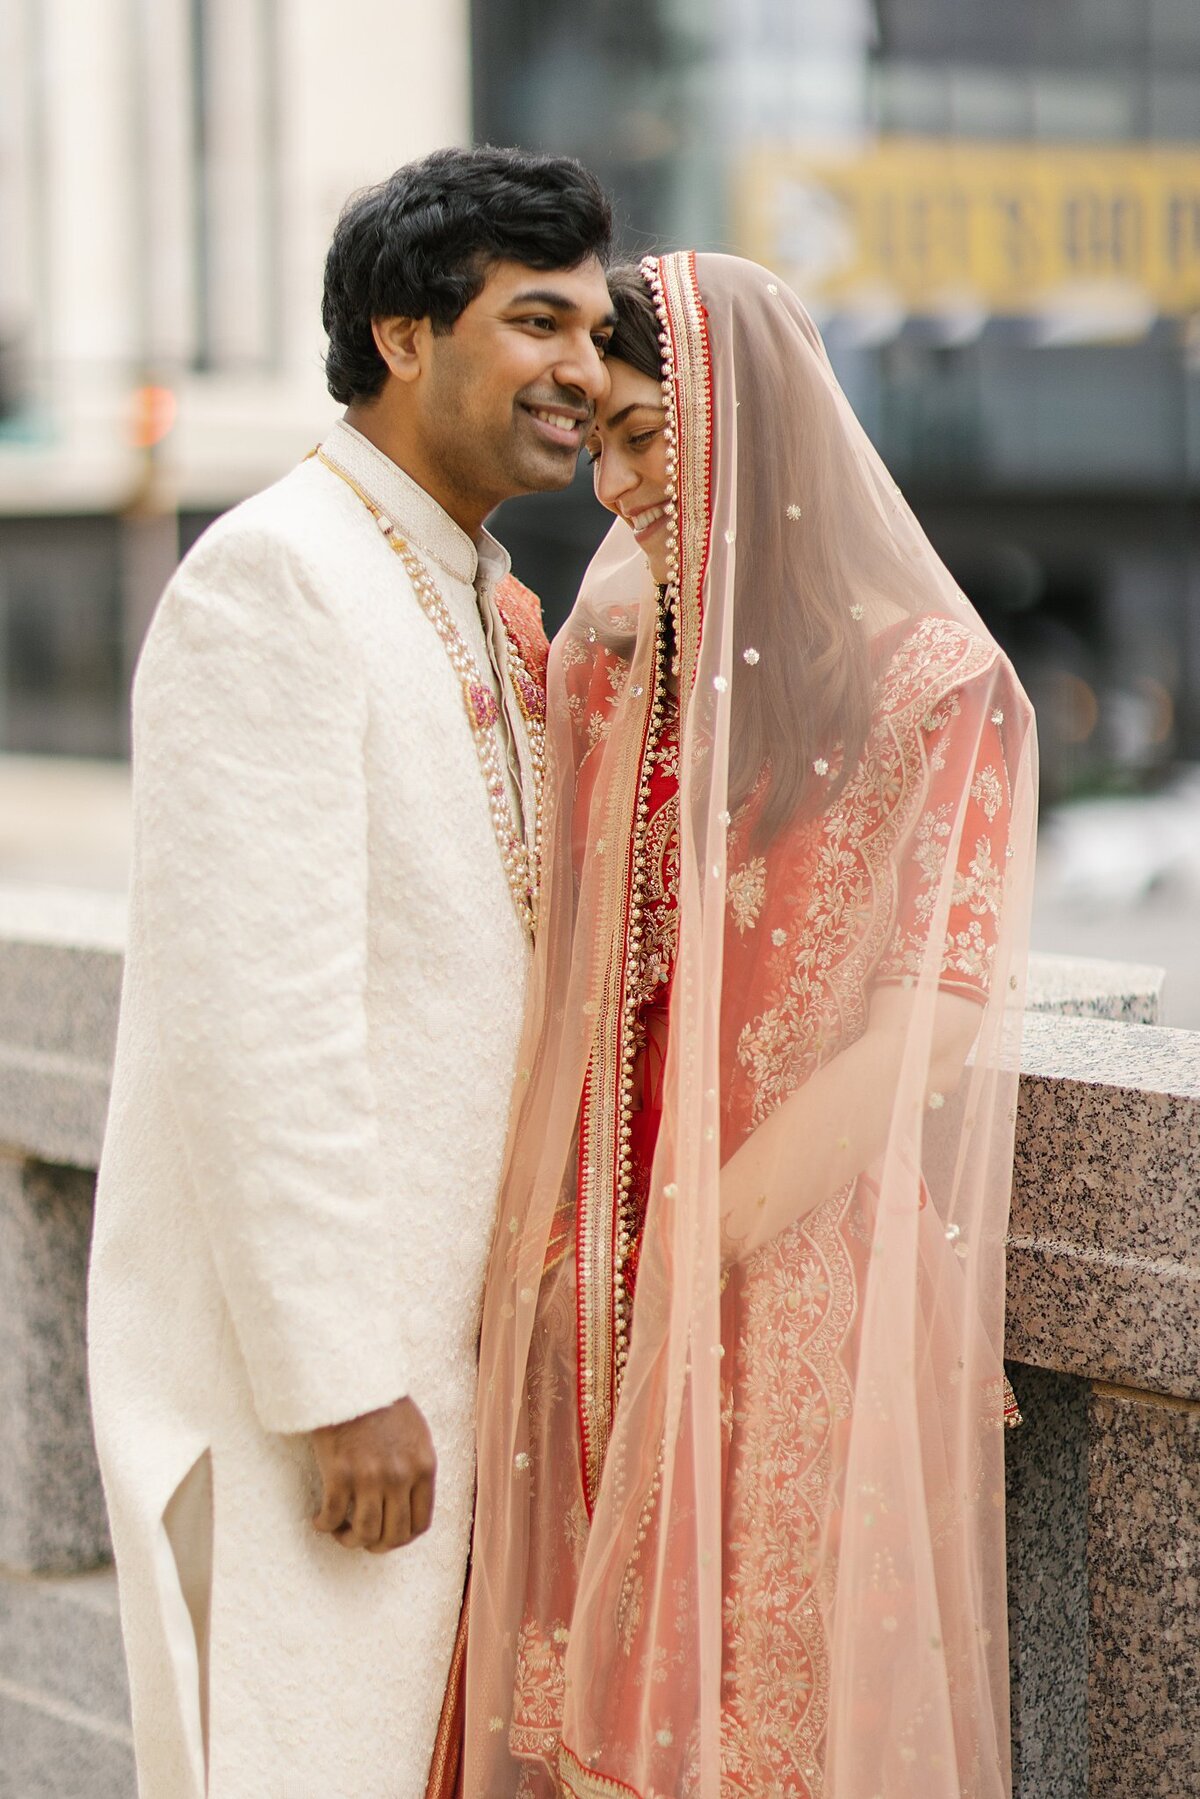 Indian bride in a red and gold wedding saree embraces the Hindu groom wearing a white sharwani with a gold wedding necklace outside the Frist Museum of Art in Nashville, TN